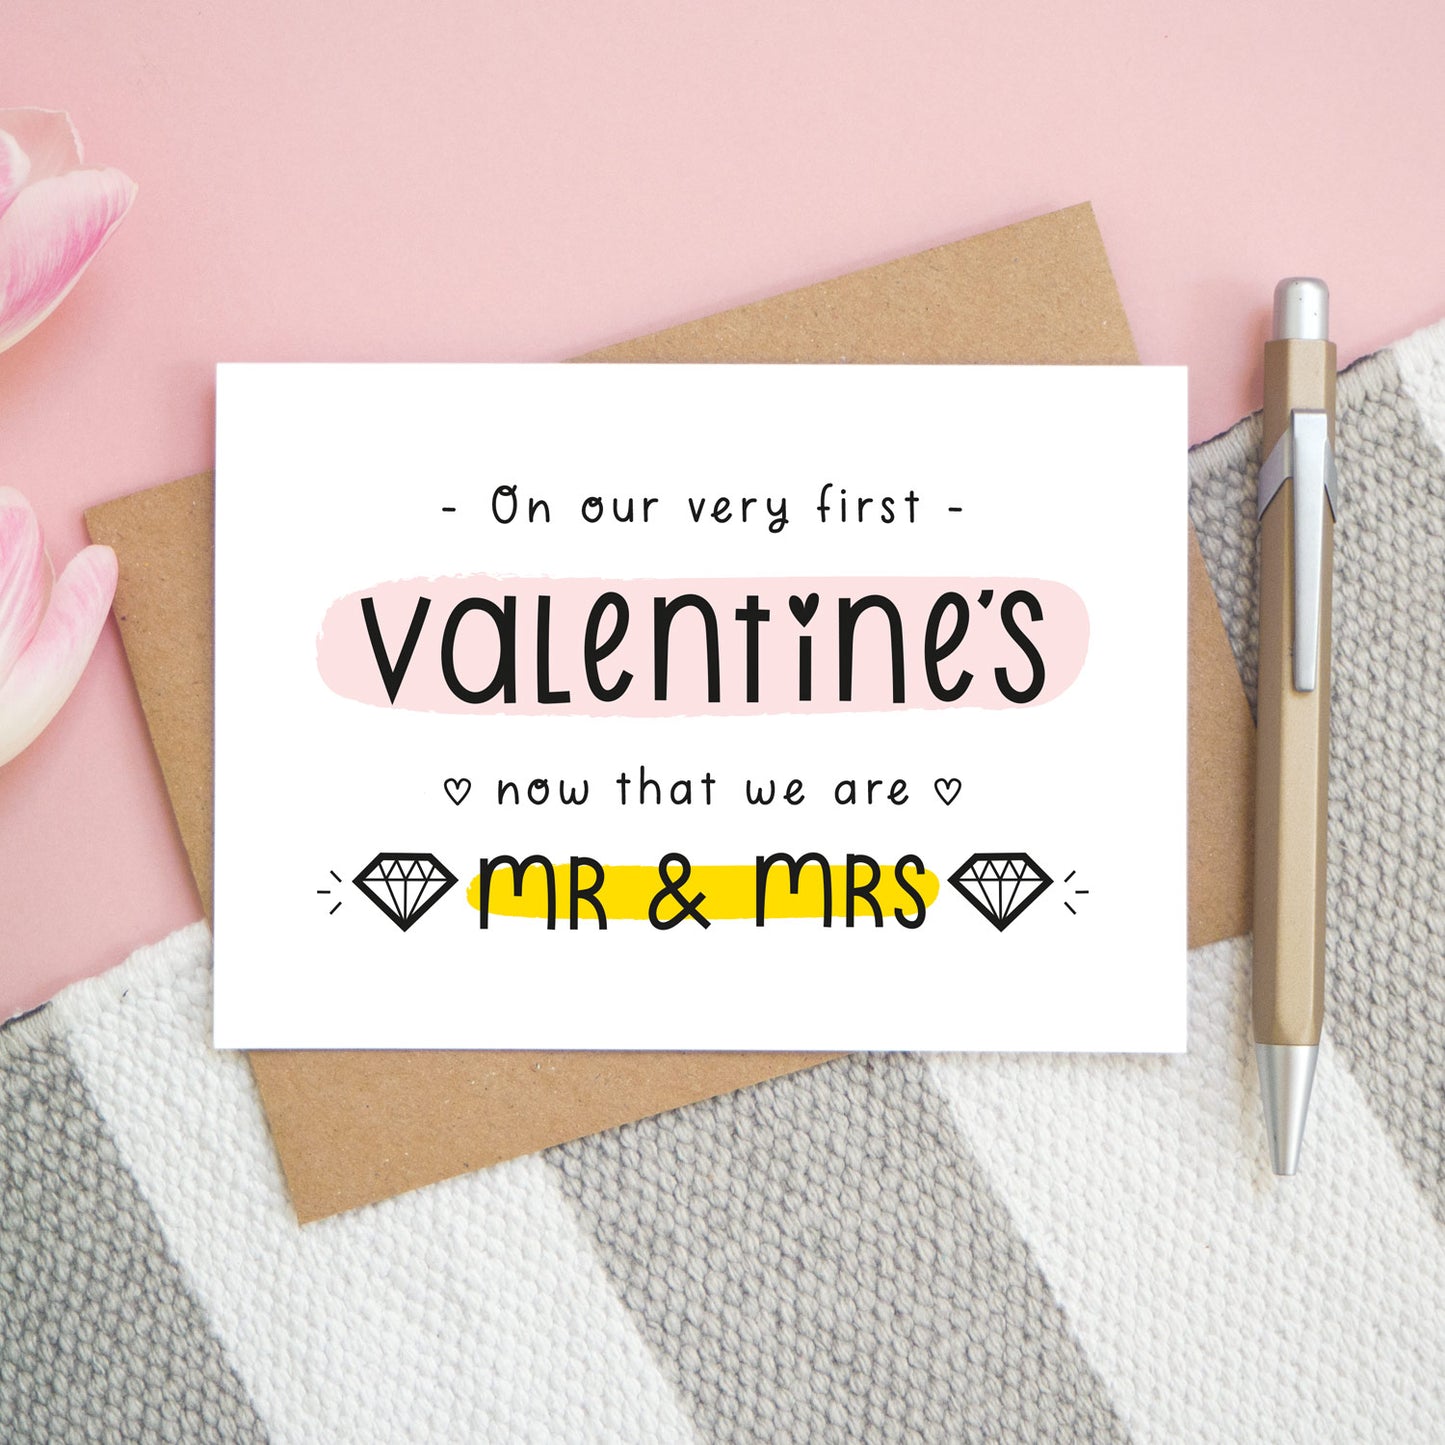 A first anniversary or Valentine’s card photographed on a pink background with pink tulip flowers, a gold pen and a grey and white stripe rug. This image shows the first valentine’s option with the Mr & Mrs wording. The text is black and there are pops of yellow and pink behind key words.